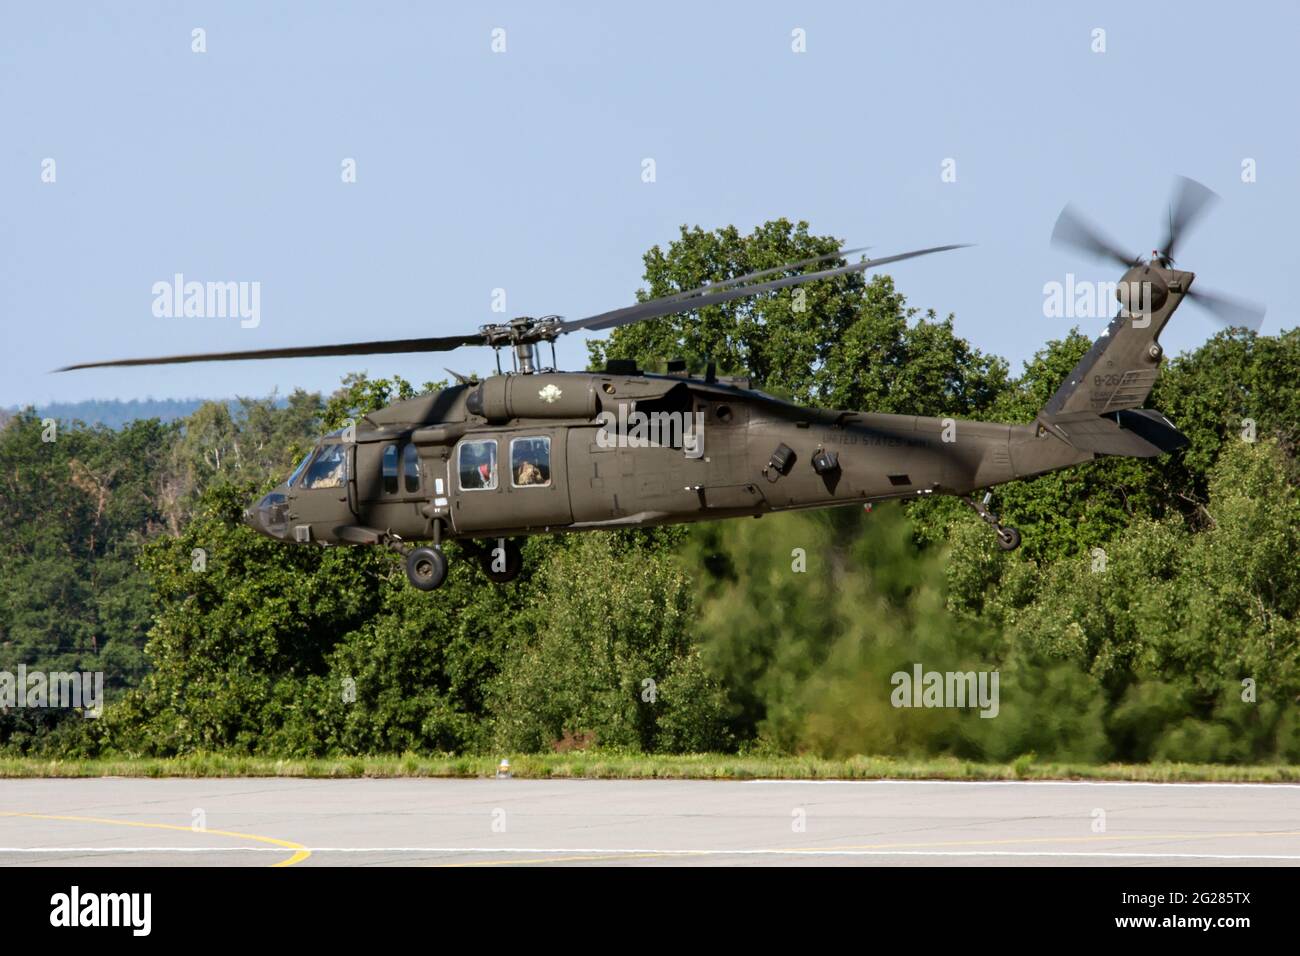 U.S. Army UH-60L helicopter of the 101st Airborne Division. Stock Photo